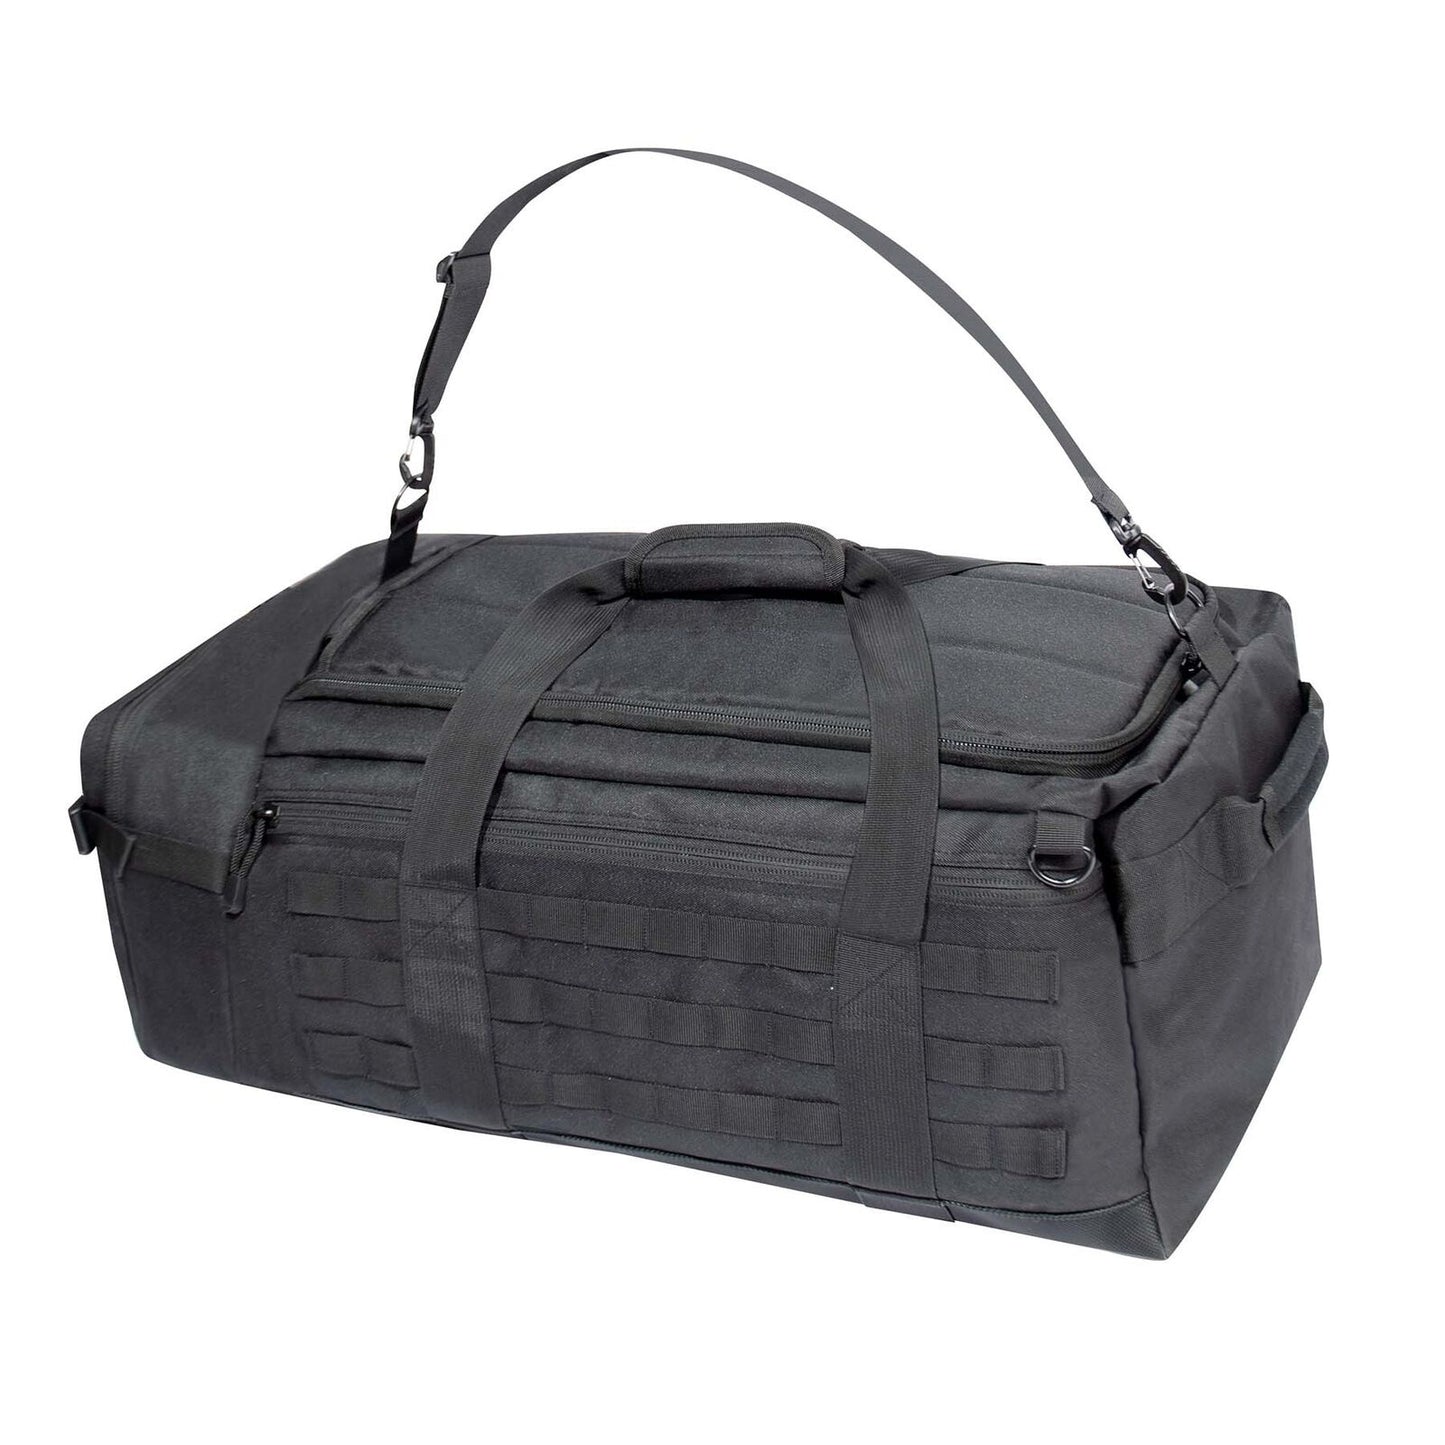 Rothco Tactical Defender Duffle Bag in Black 28"x14"x10"